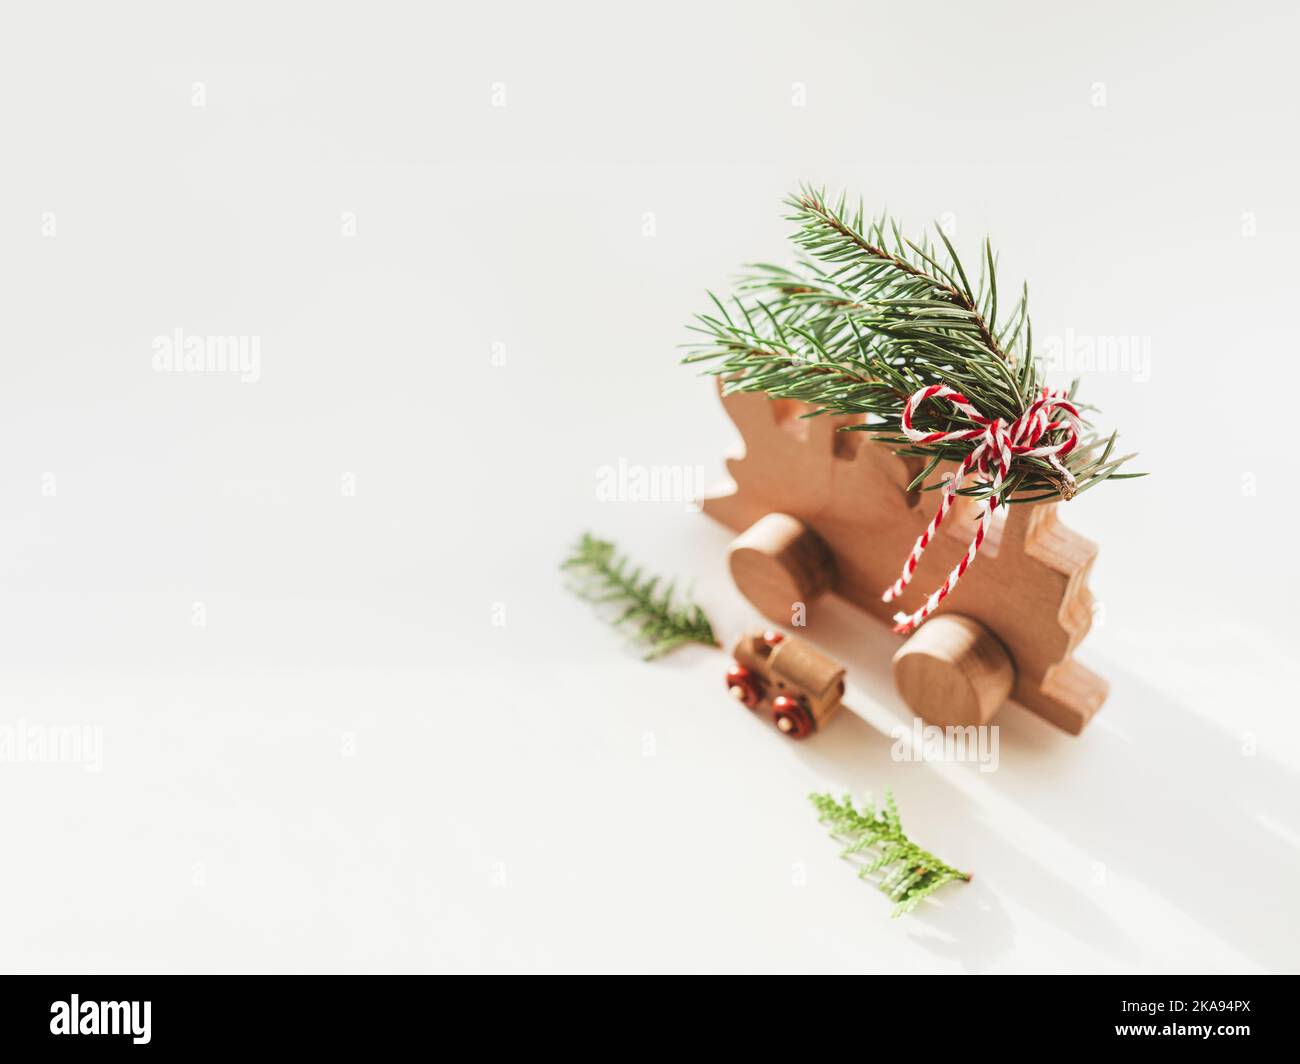 Two wooden trains with tied fir tree coniferous twigs. Dad and baby. Cute symbol of Christmas tree brought home for New Year celebration. Winter Stock Photo